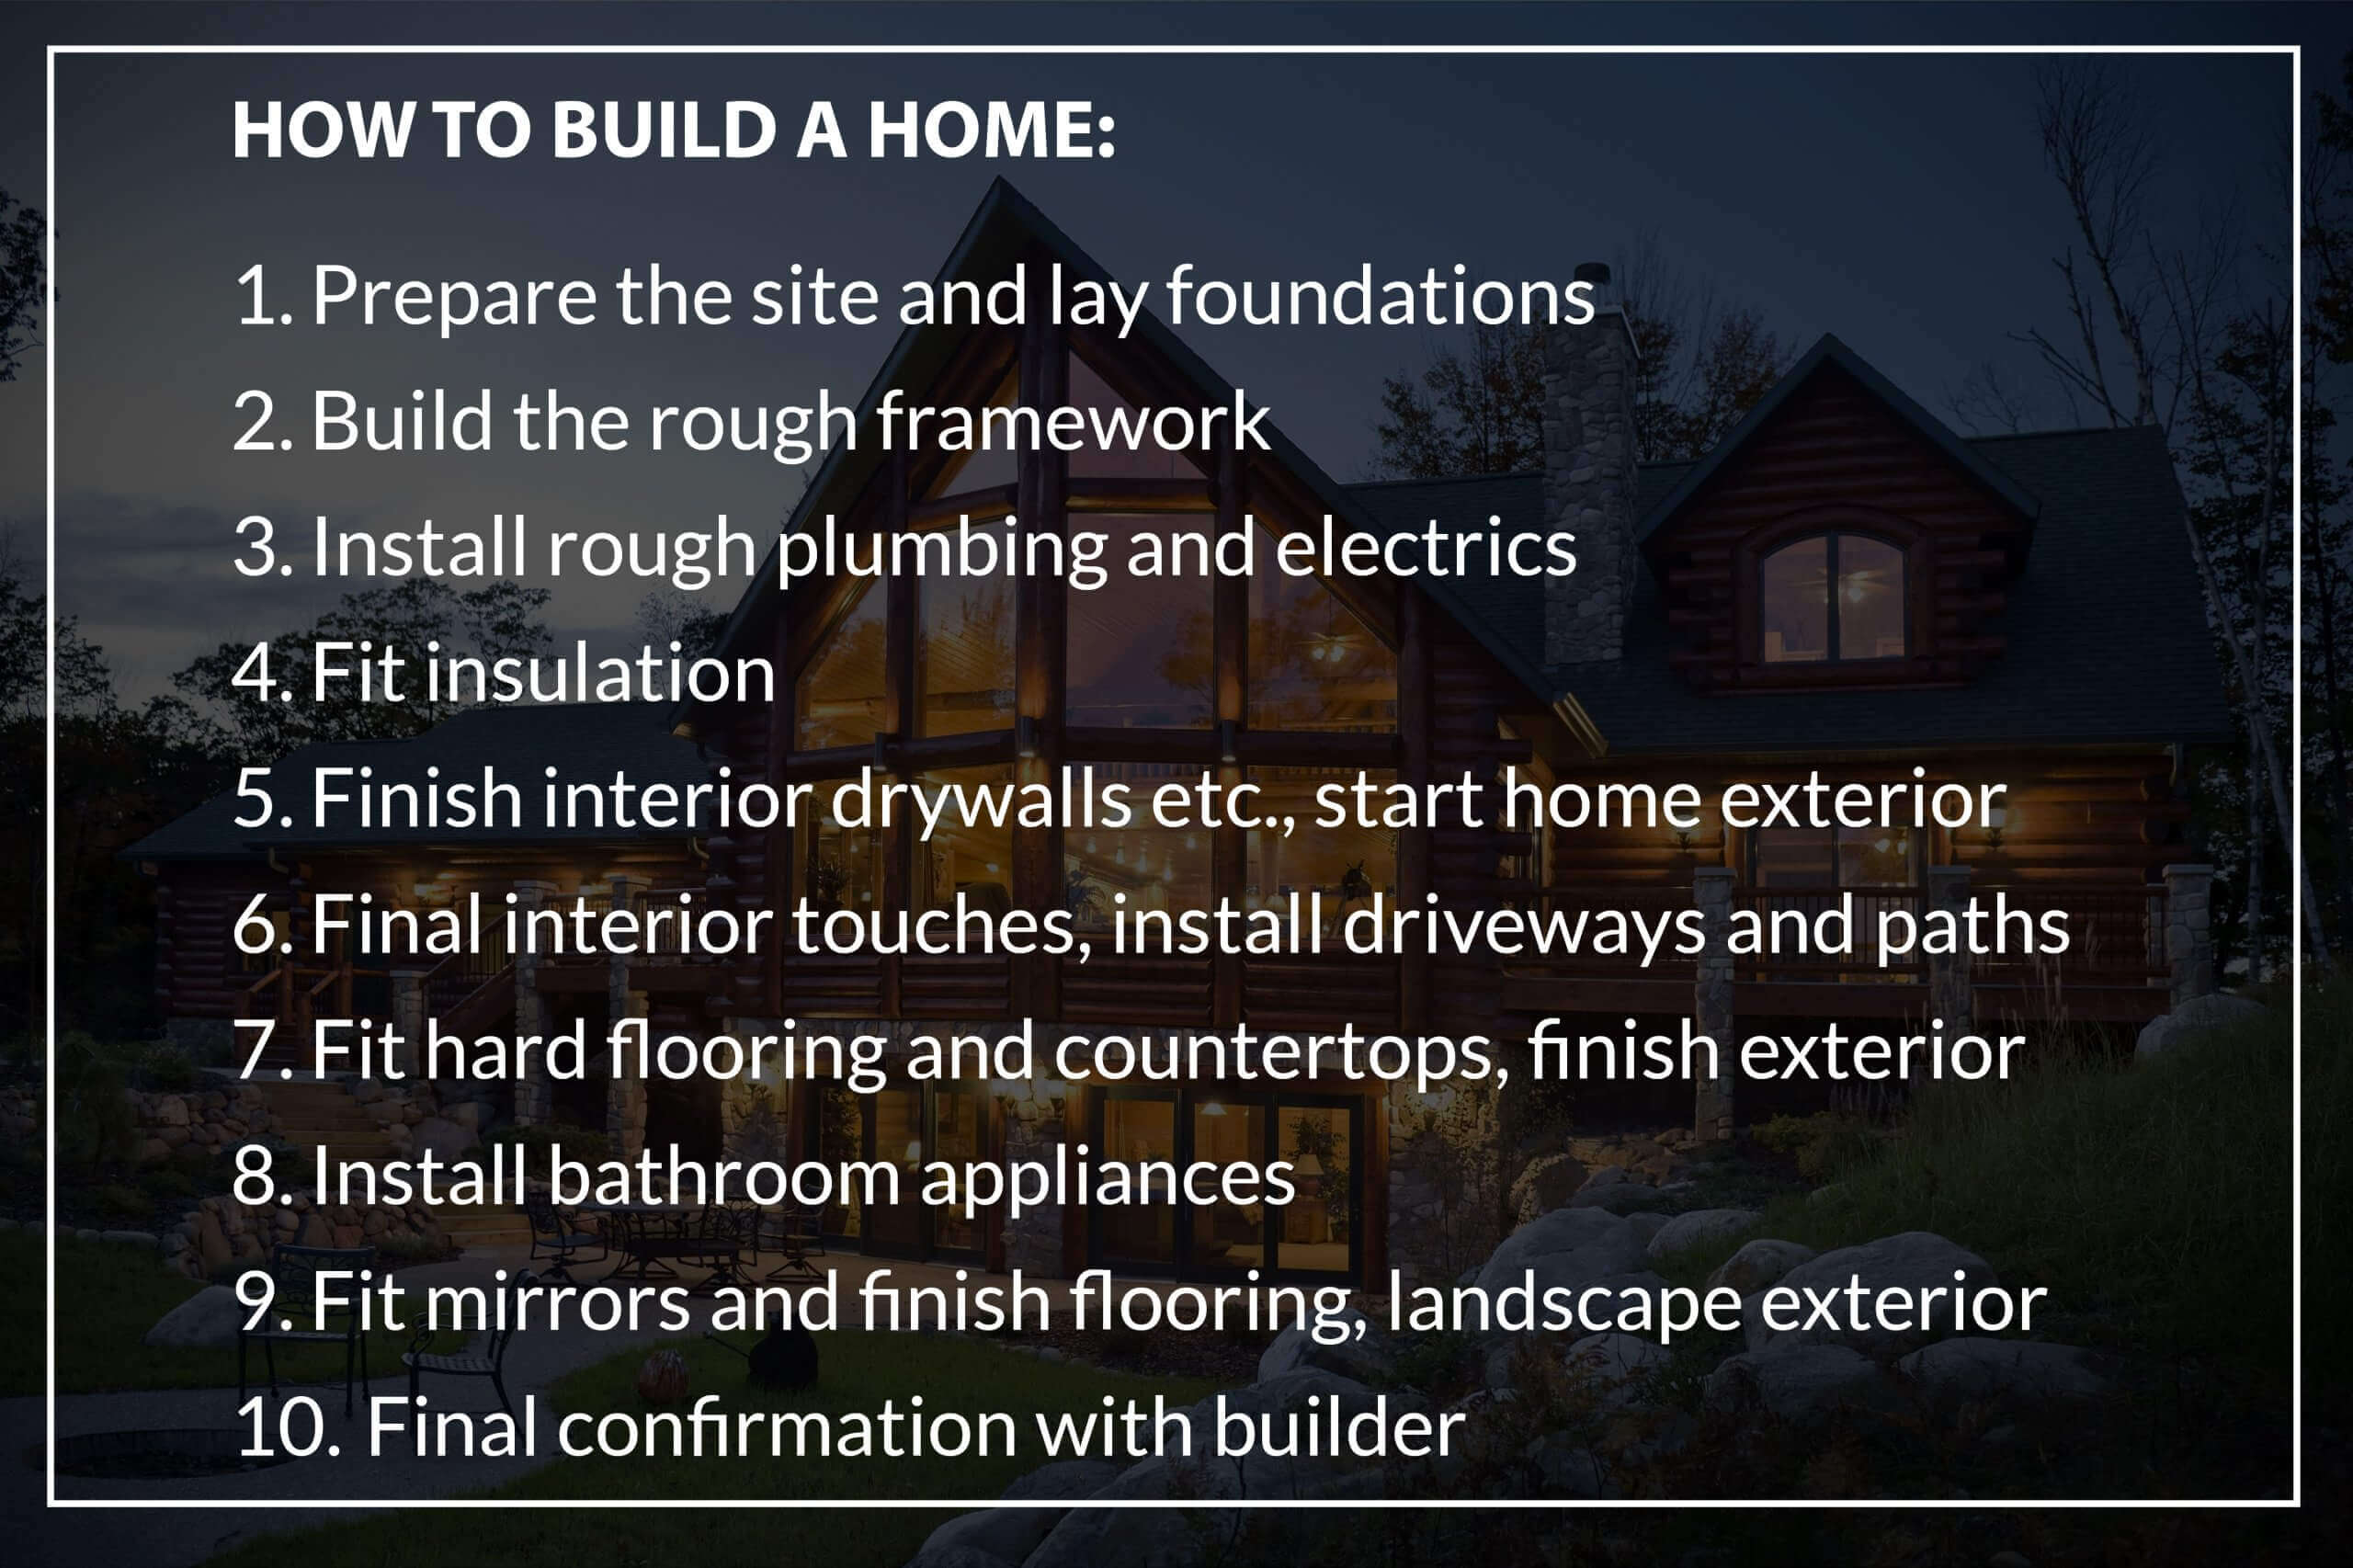 How to build a home